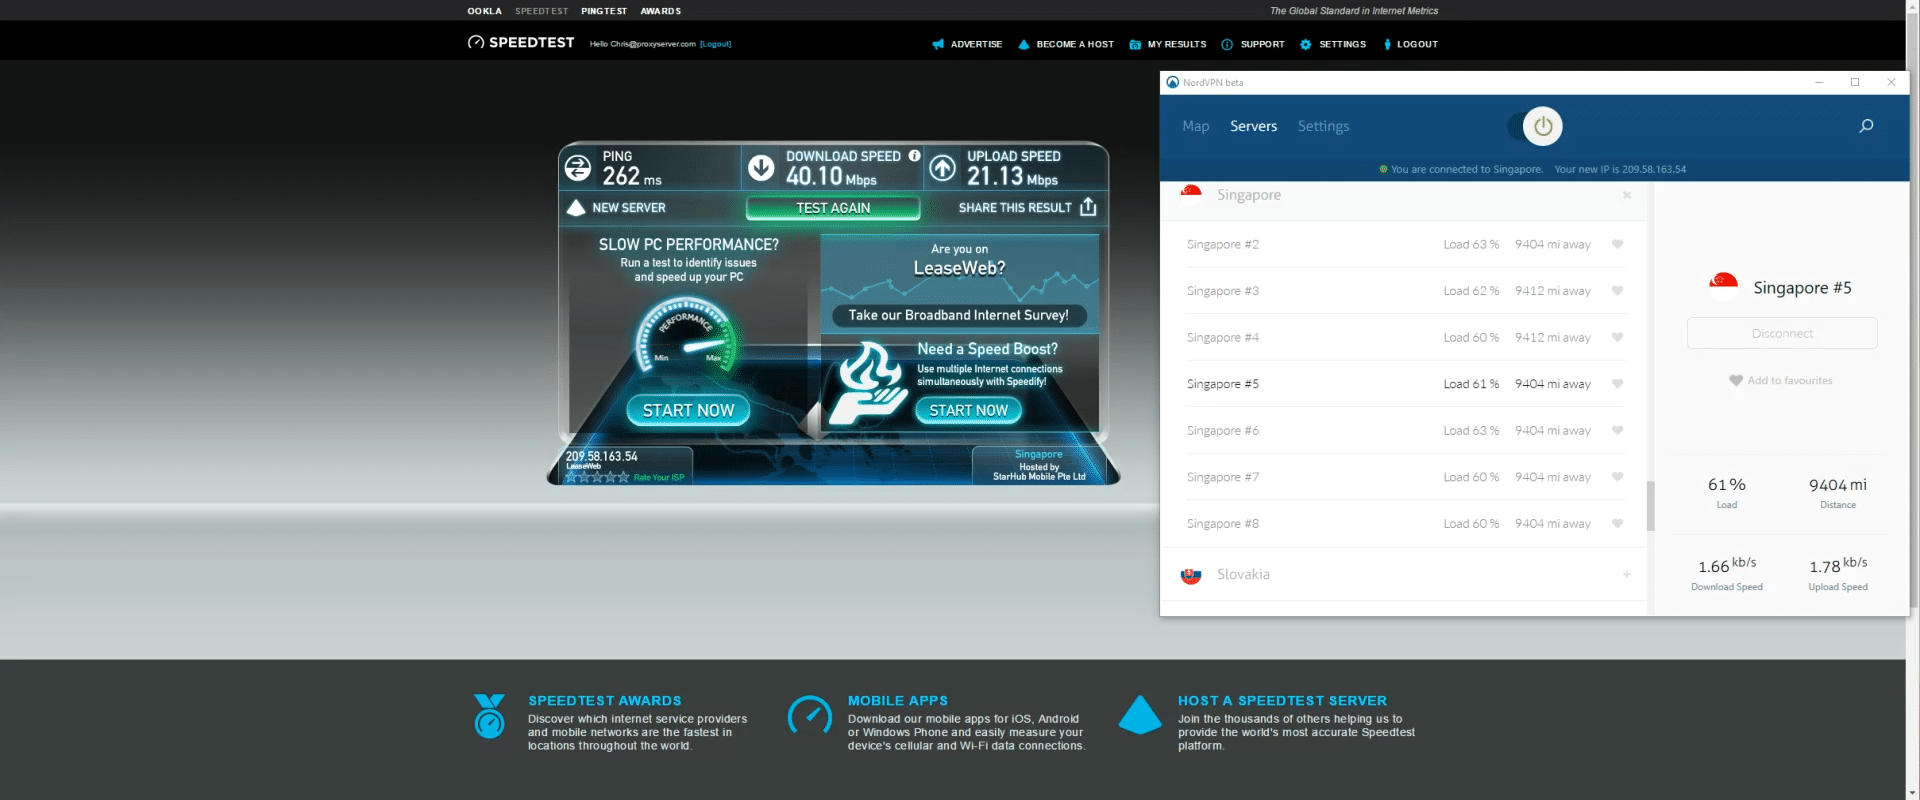 NordVPN Speed test Singapore with downloading speed of 40 Mbps